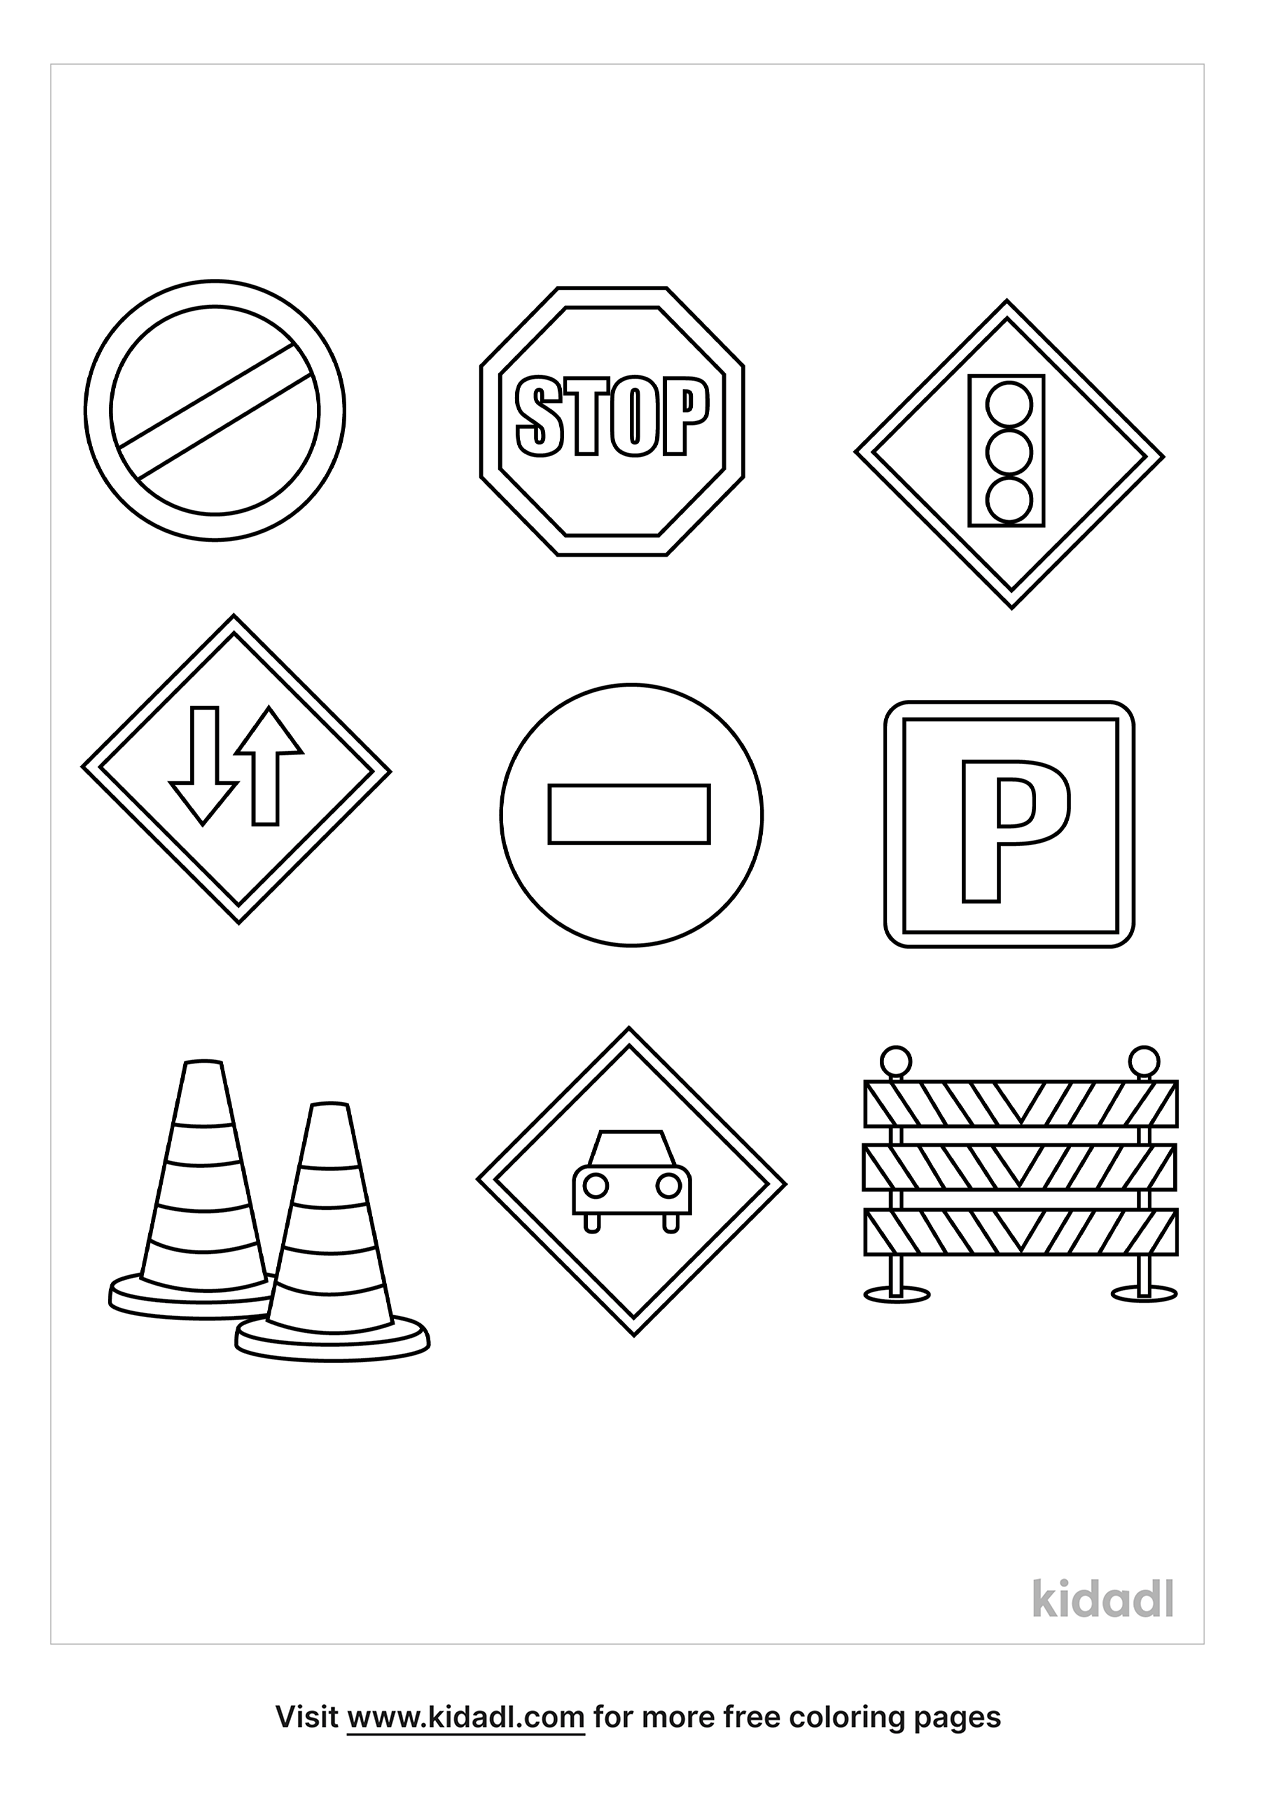 Traffic Signs For Kids Coloring Page | Free Outdoor Coloring Page | Kidadl